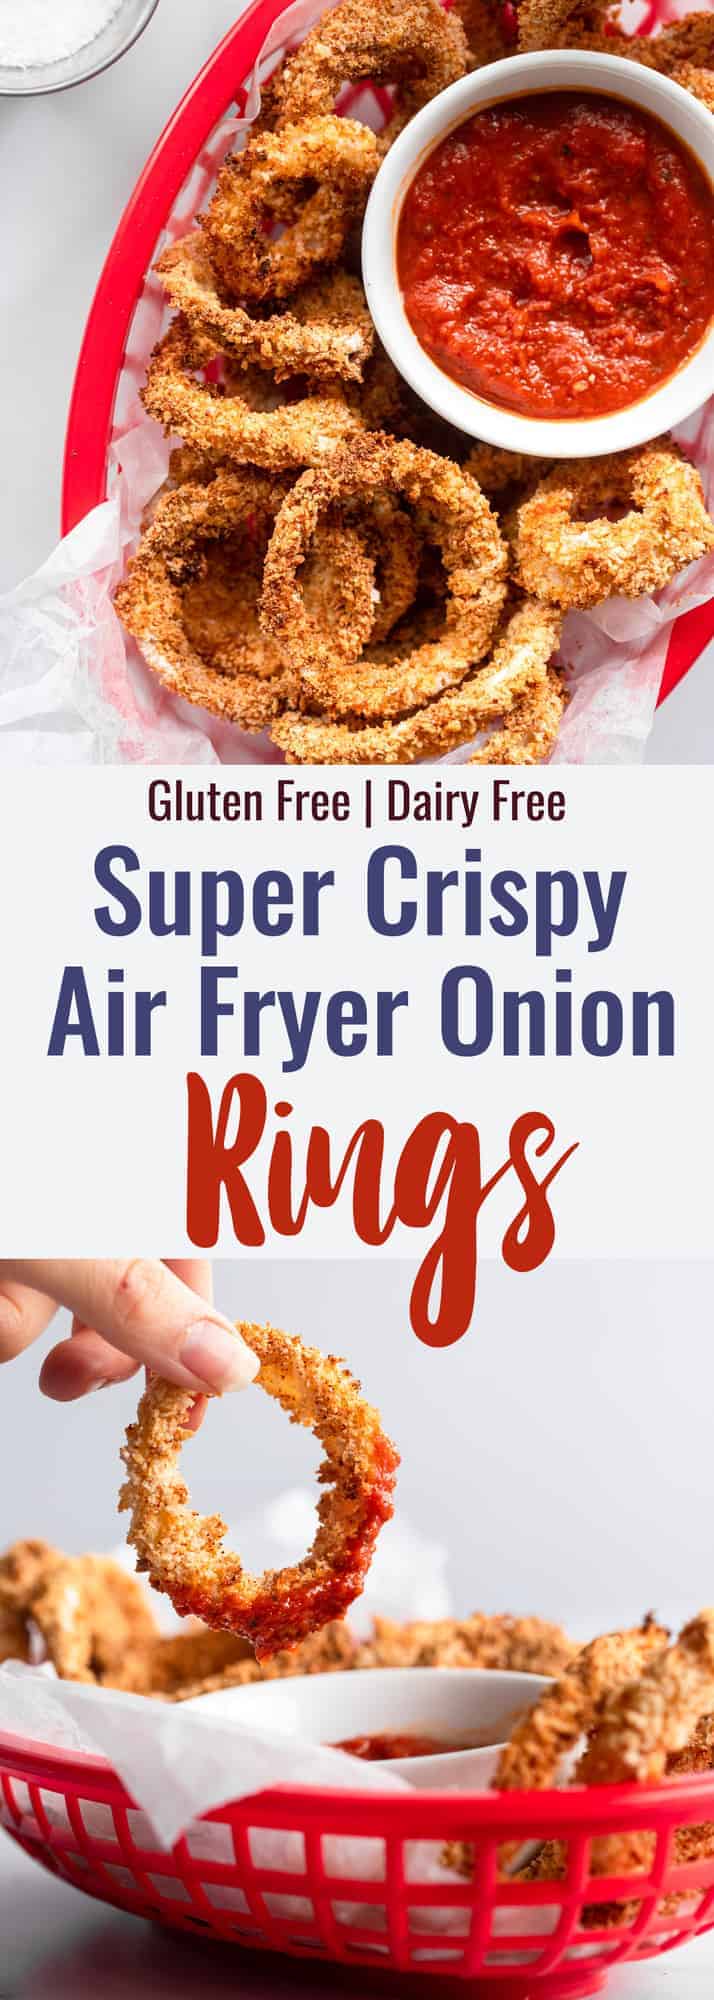 Air Fried Onion Rings collage photo